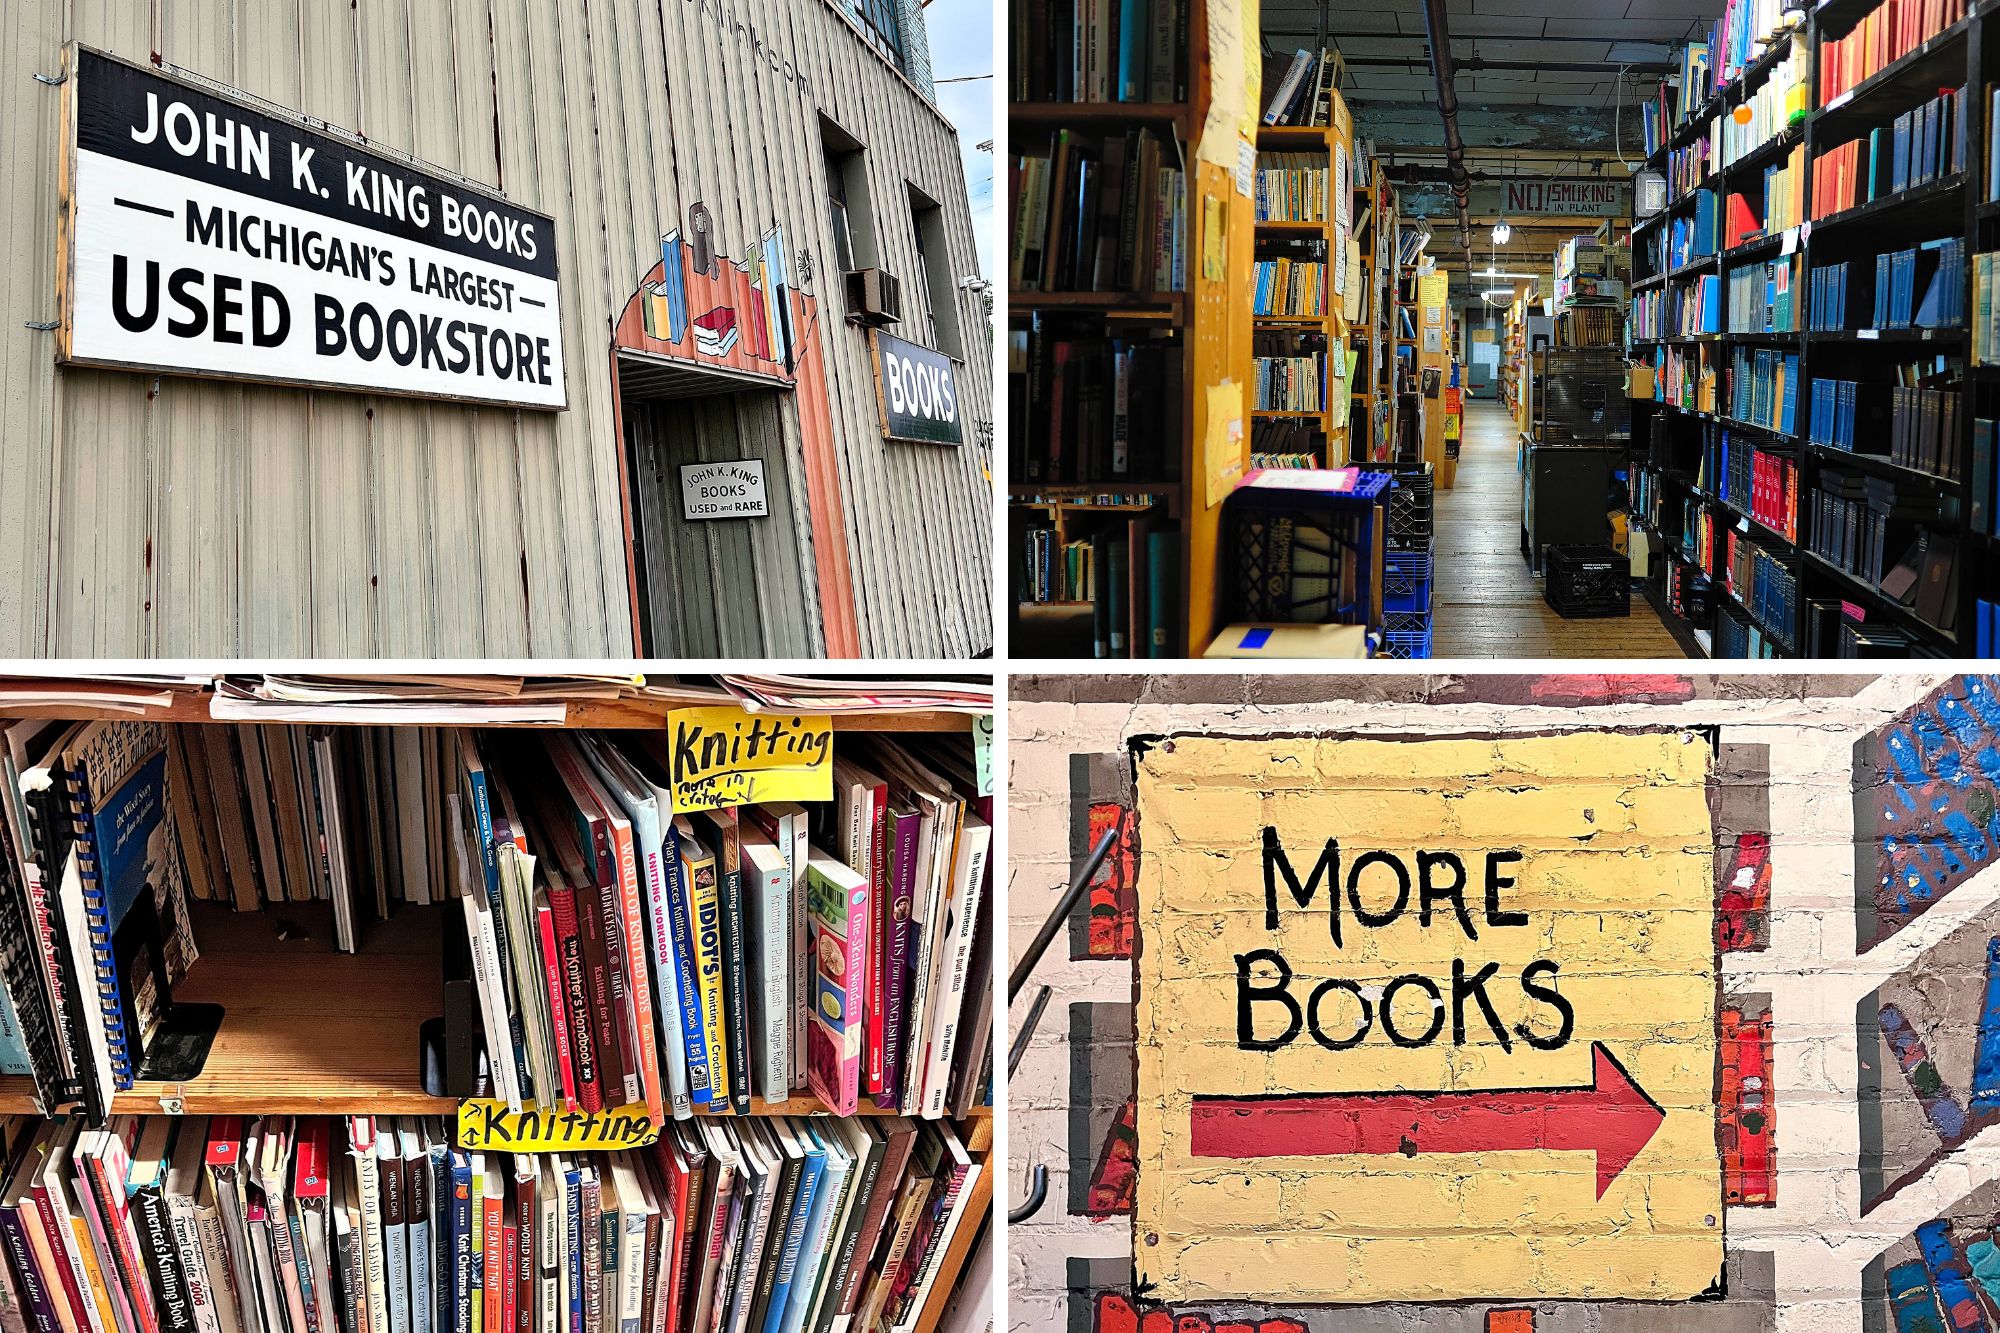 Interior and exterior of John K. King Used Books